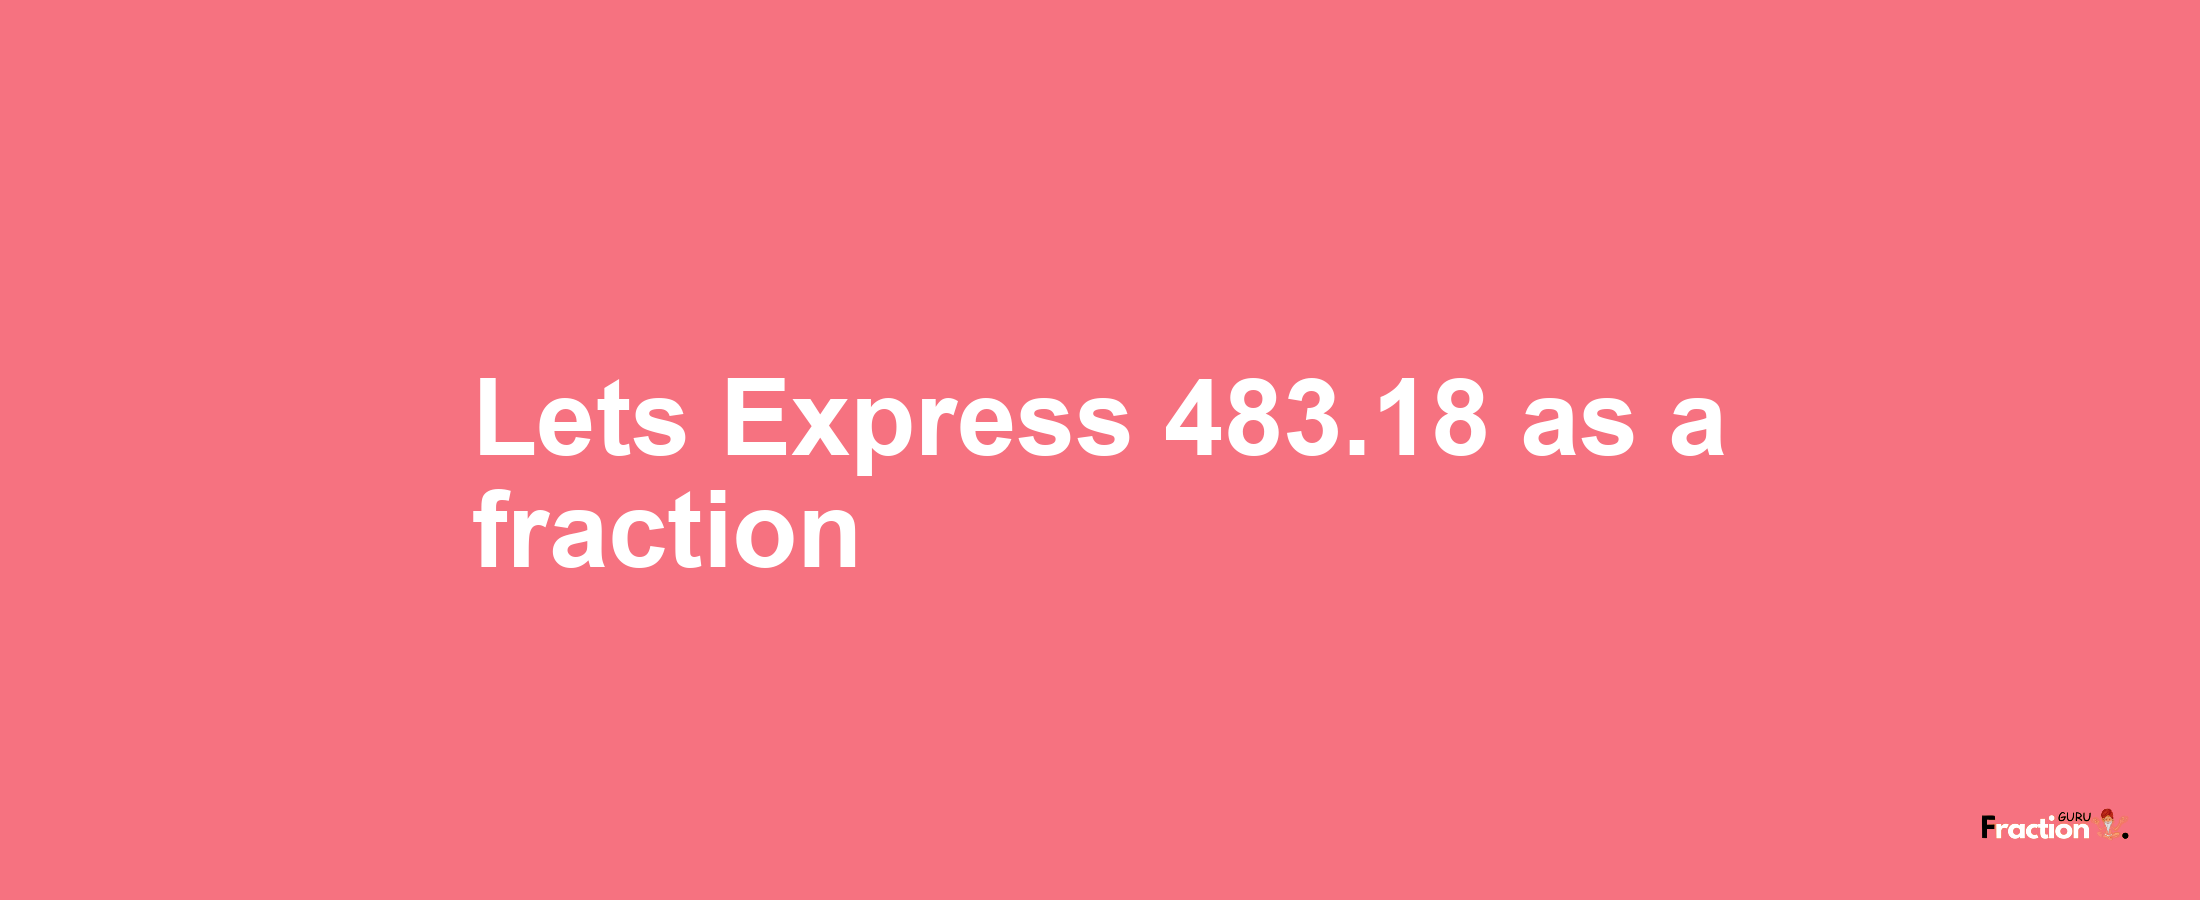 Lets Express 483.18 as afraction